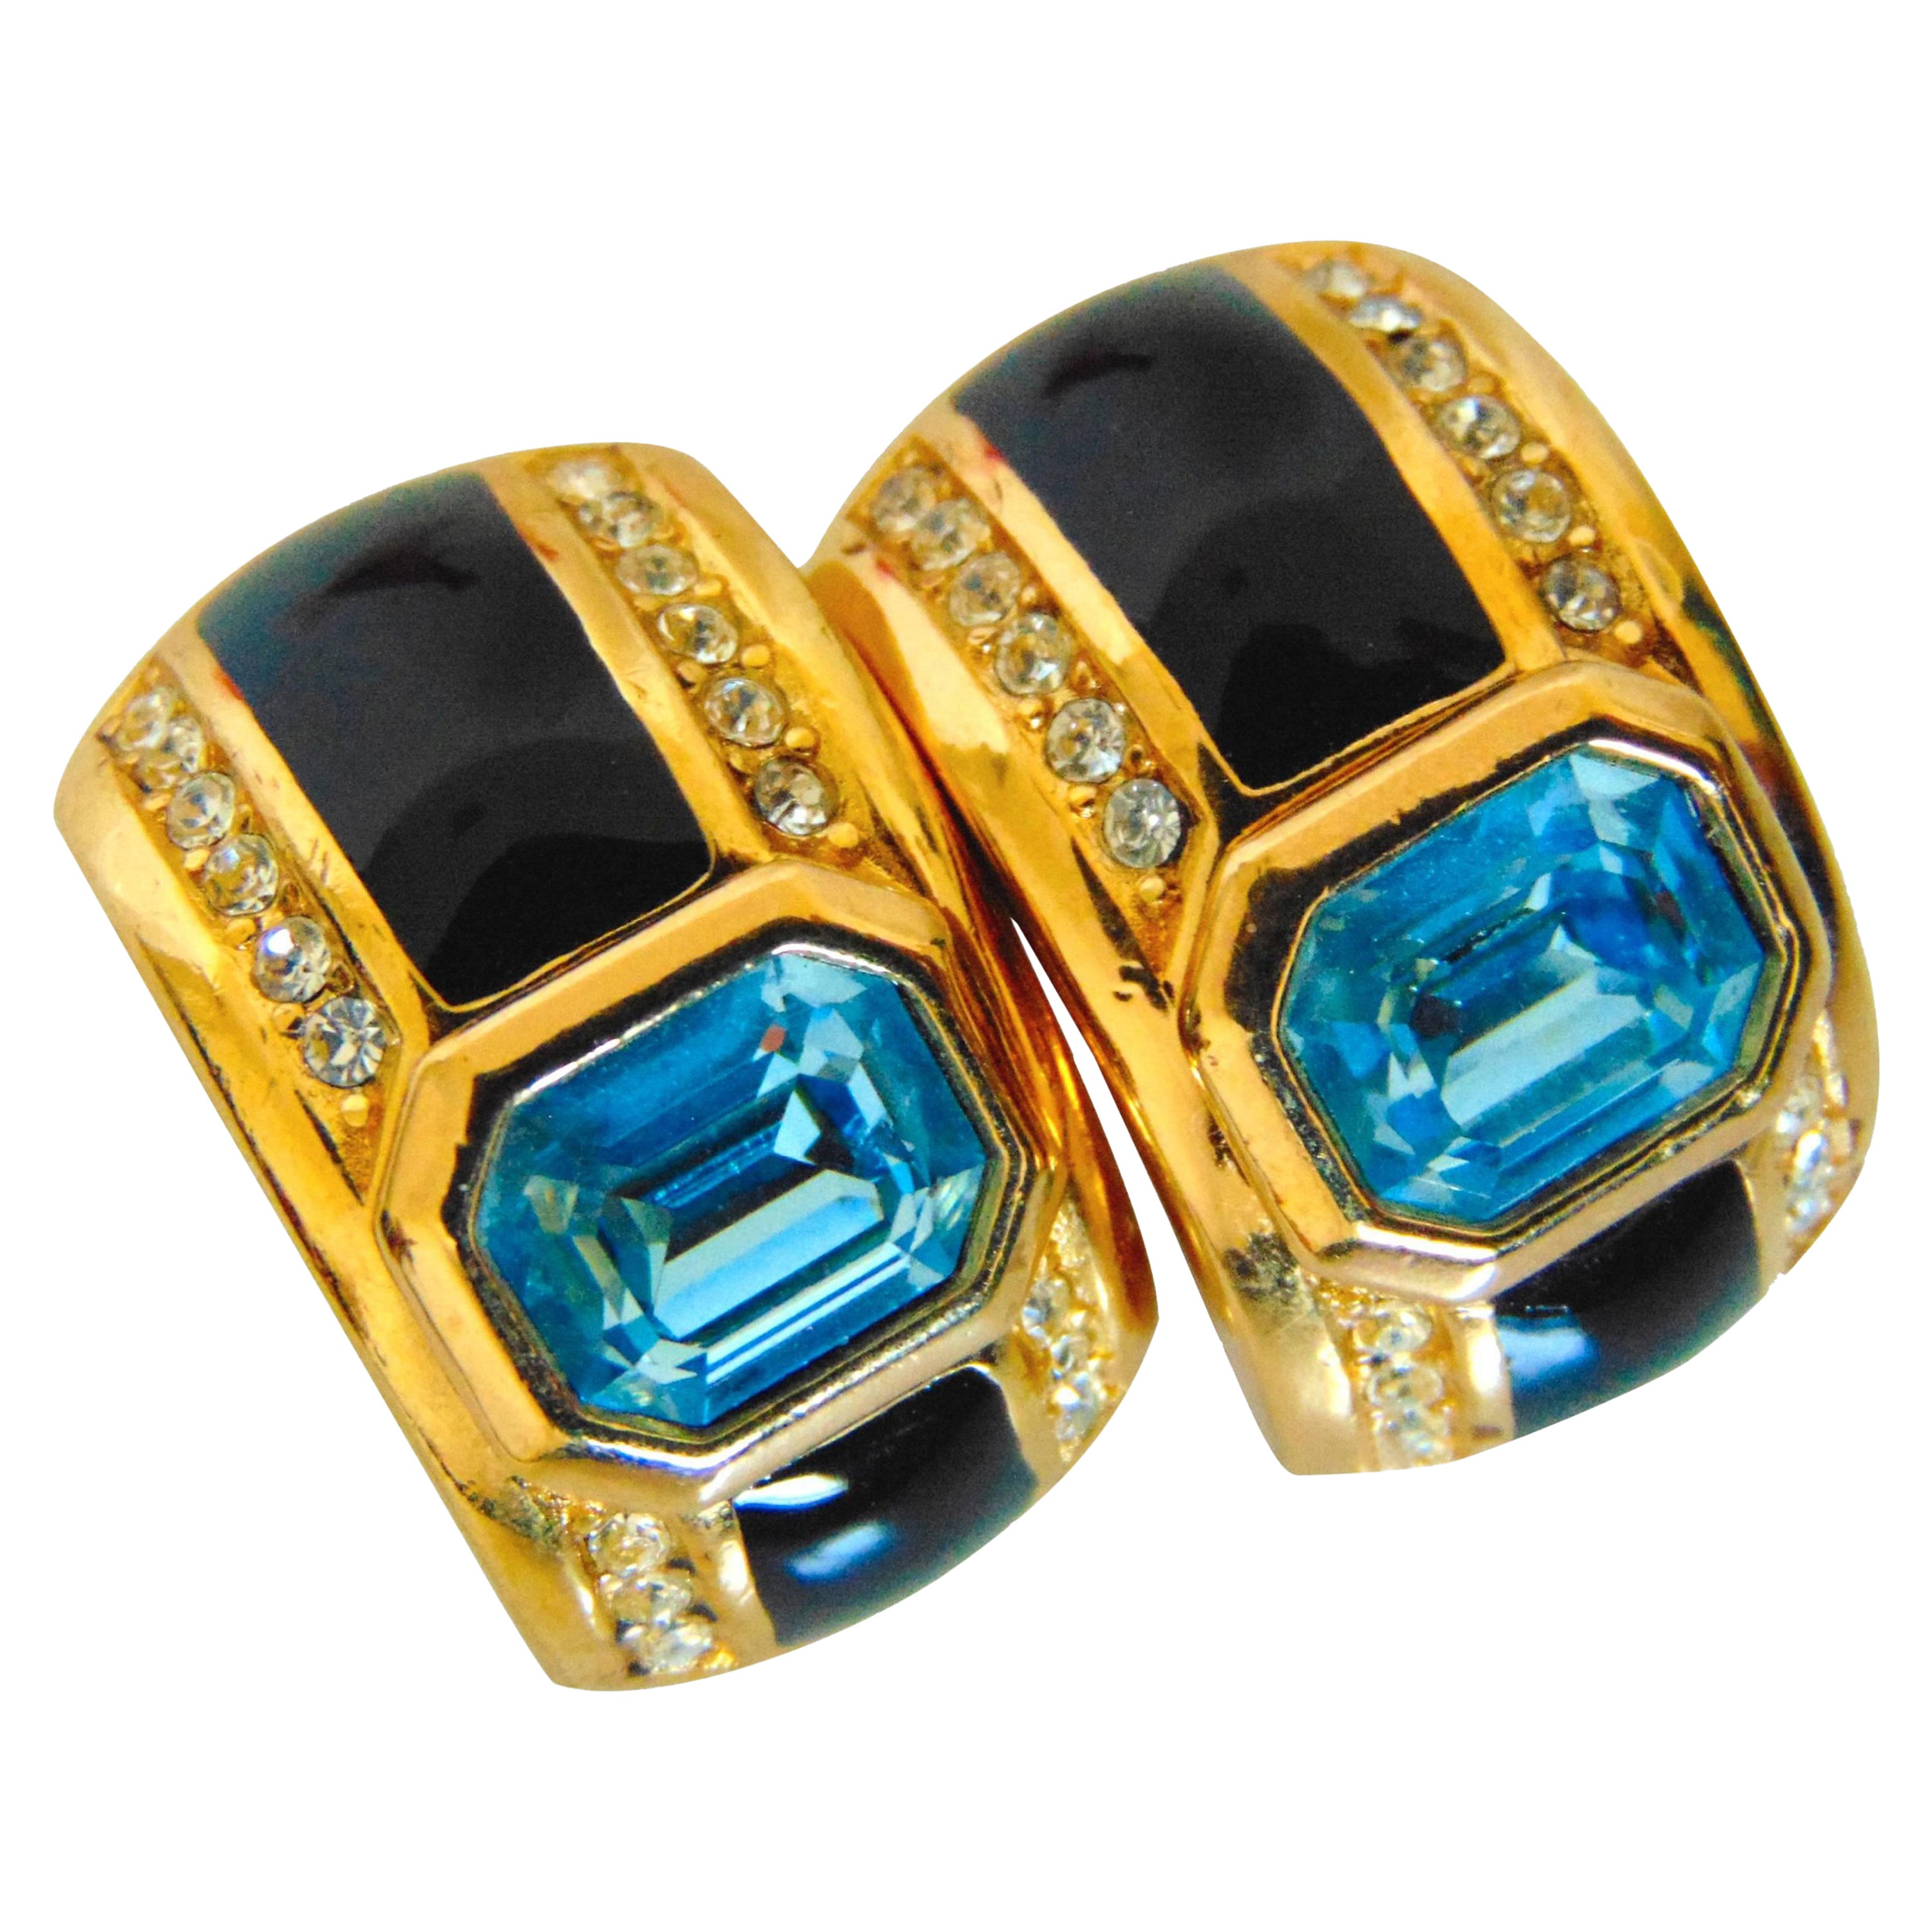 Christian Dior Art Deco Earrings with Faux Sapphire Topaz Crystals 1980s For Sale